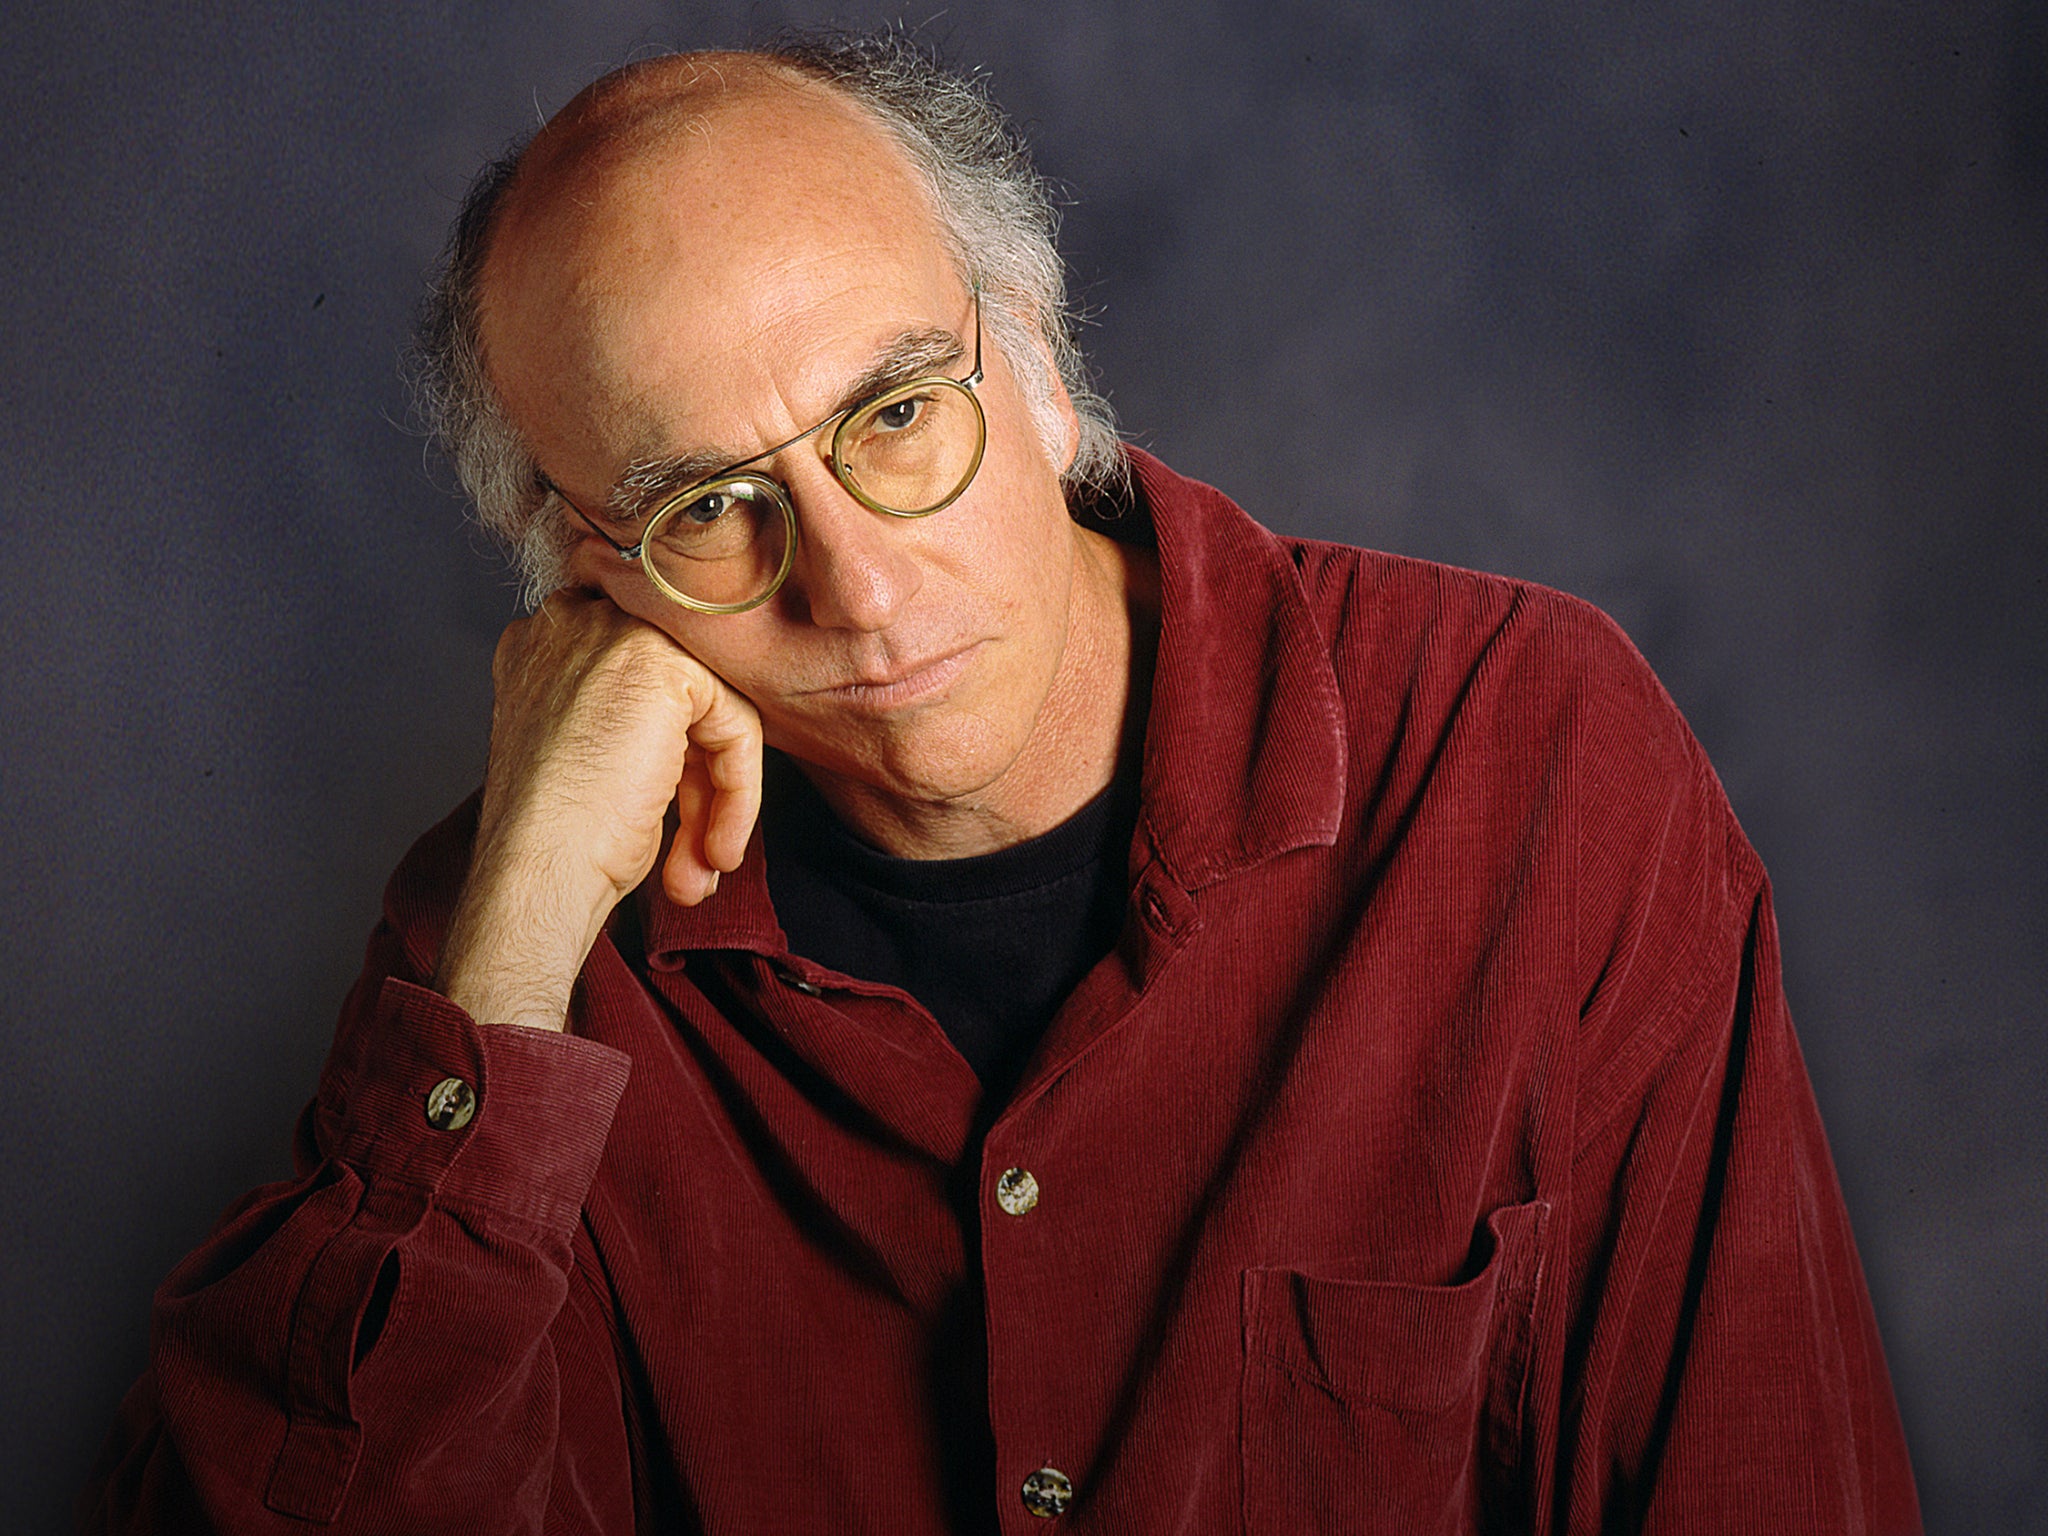 ‘Curb Your Enthusiasm’, Larry David’s celebrated follow-up to ‘Seinfeld’, is celebrating its 20th anniversary